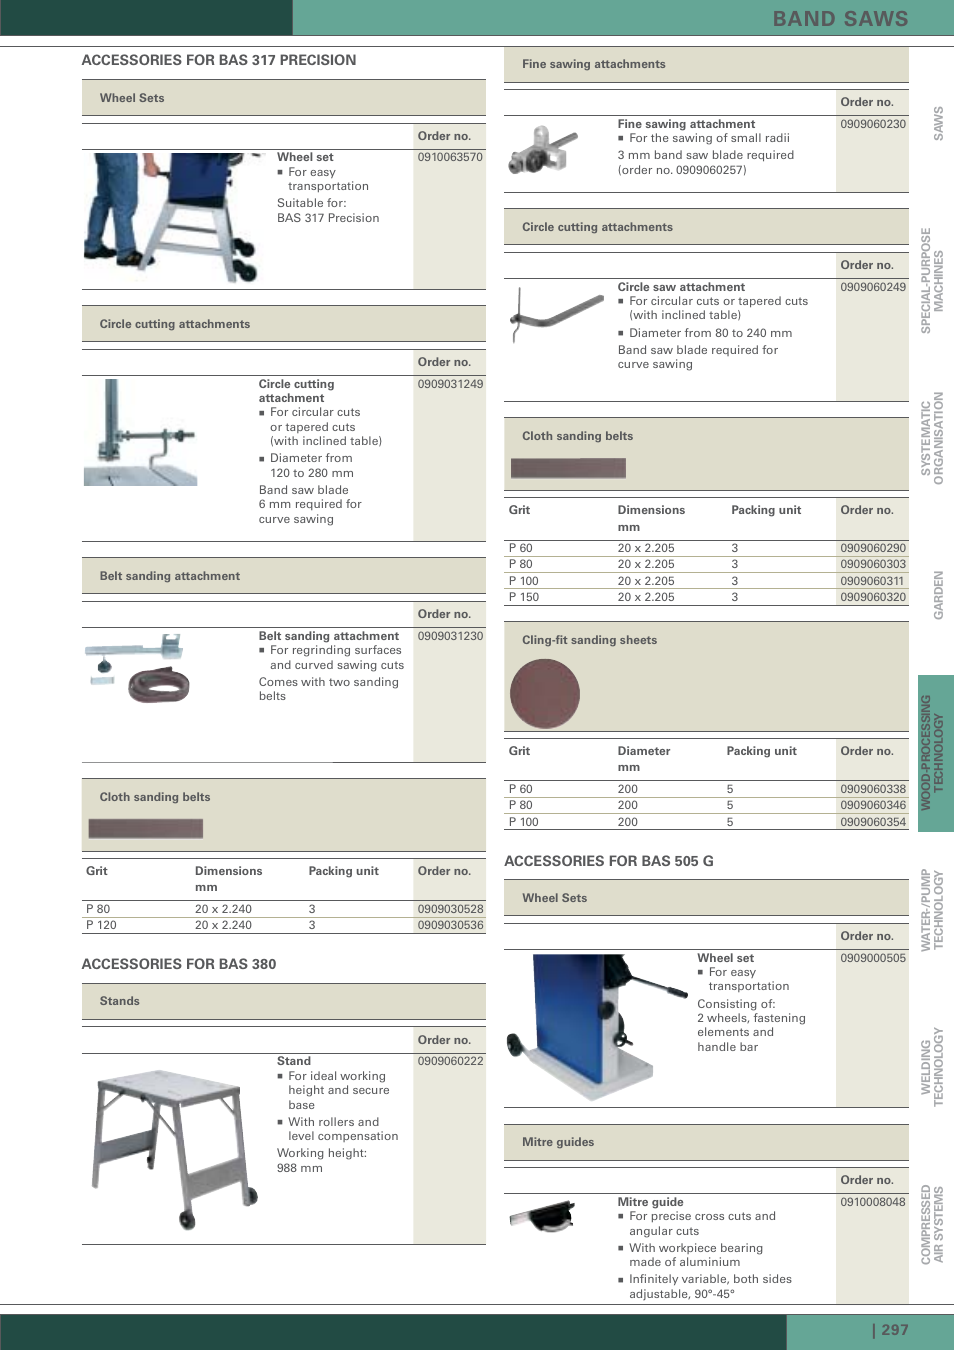 Band saws, Accessories for bas 317 precision, Accessories for bas 380 |  Metabo HC 300 User Manual | Page 20 / 21 | Original mode